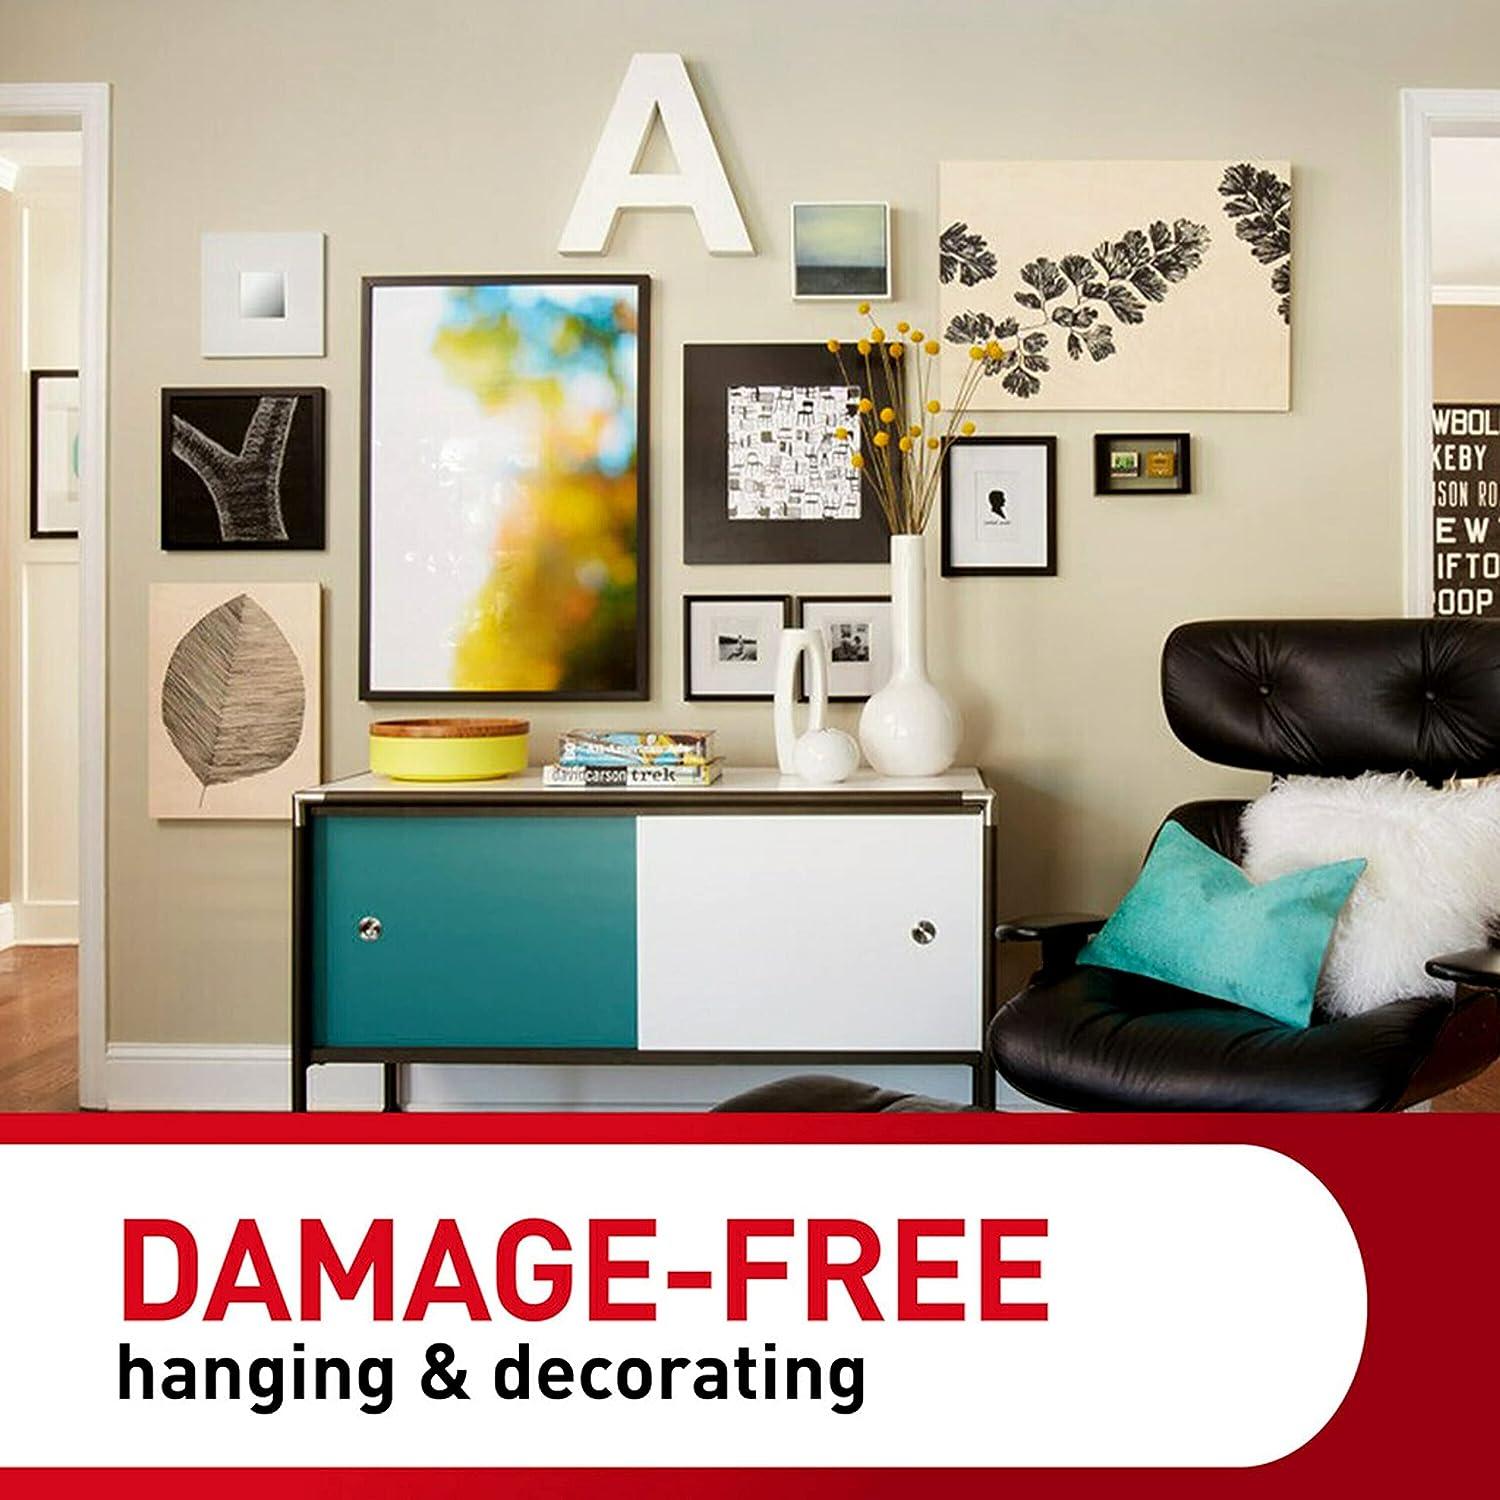 Command Medium Picture Hanging Strips, Damage Free Hanging Picture Hangers,  No Tools Wall Hanging Strips for Living Spaces, 16 White Adhesive Strip